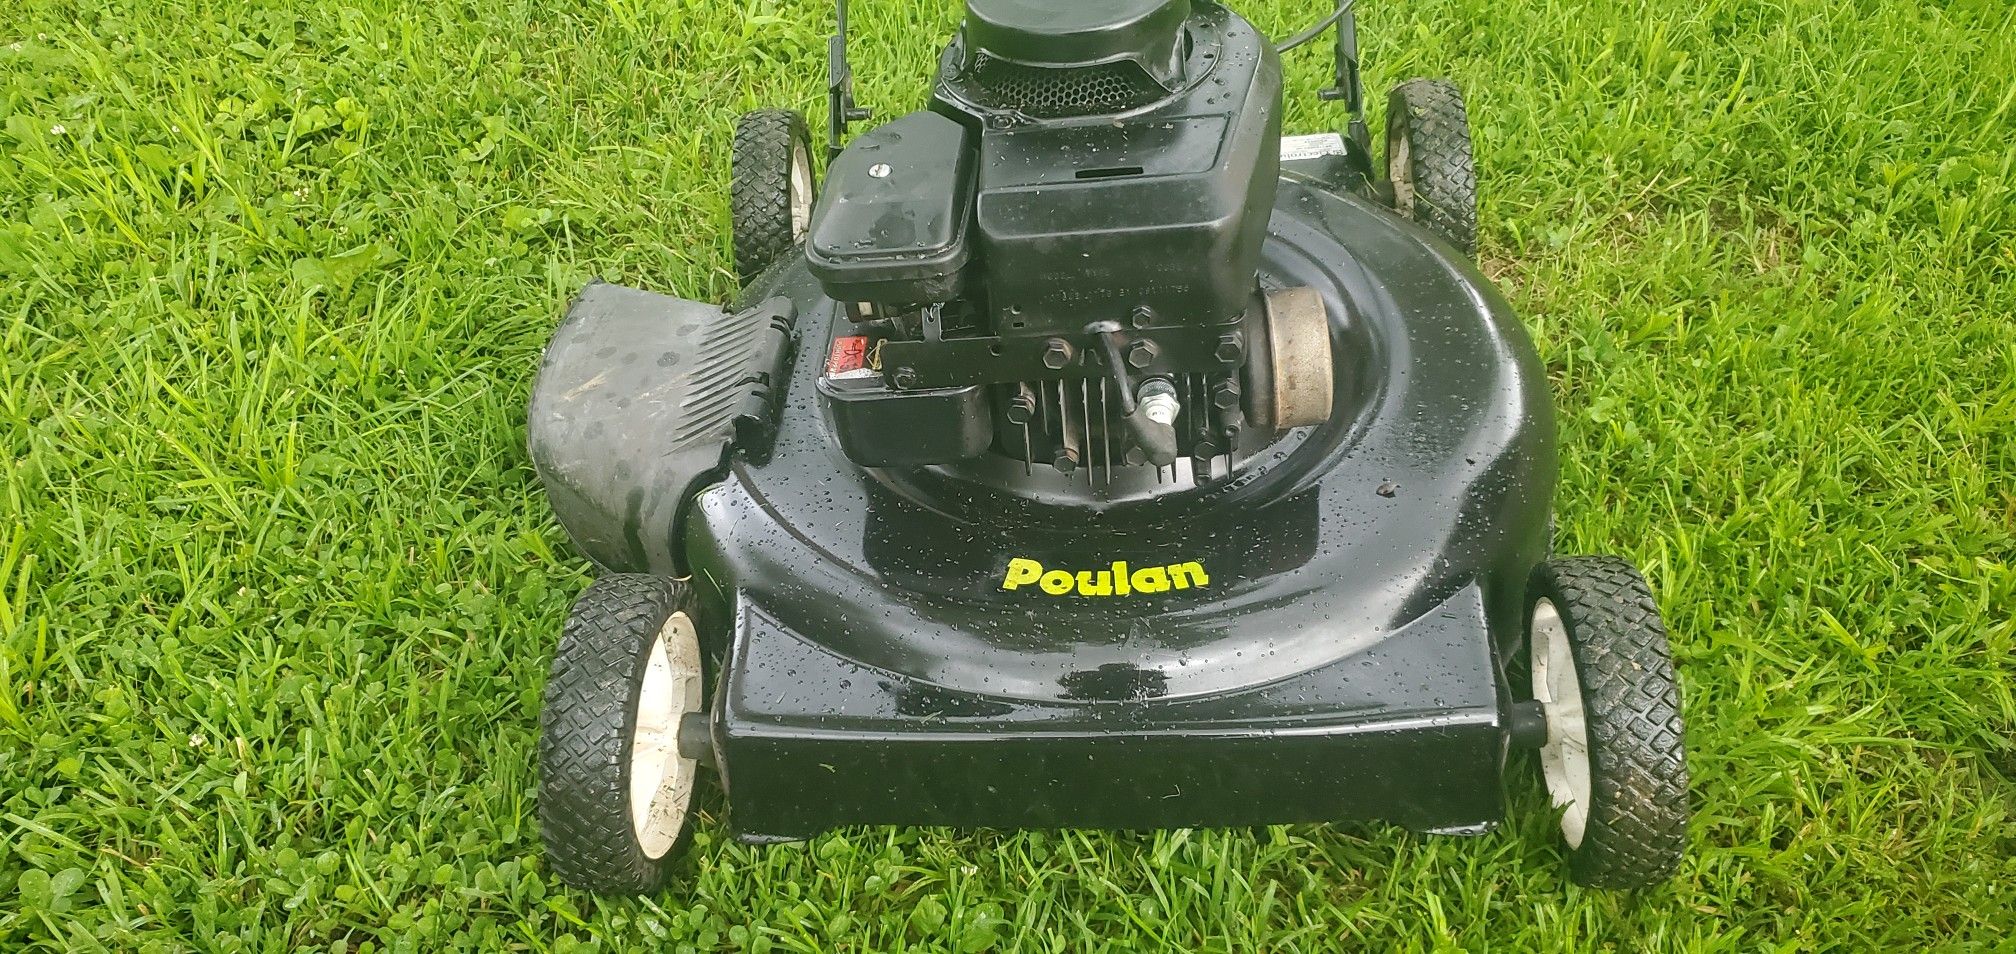 Lawn Mower- 22" Poulan, Discharge, Push (serviced)